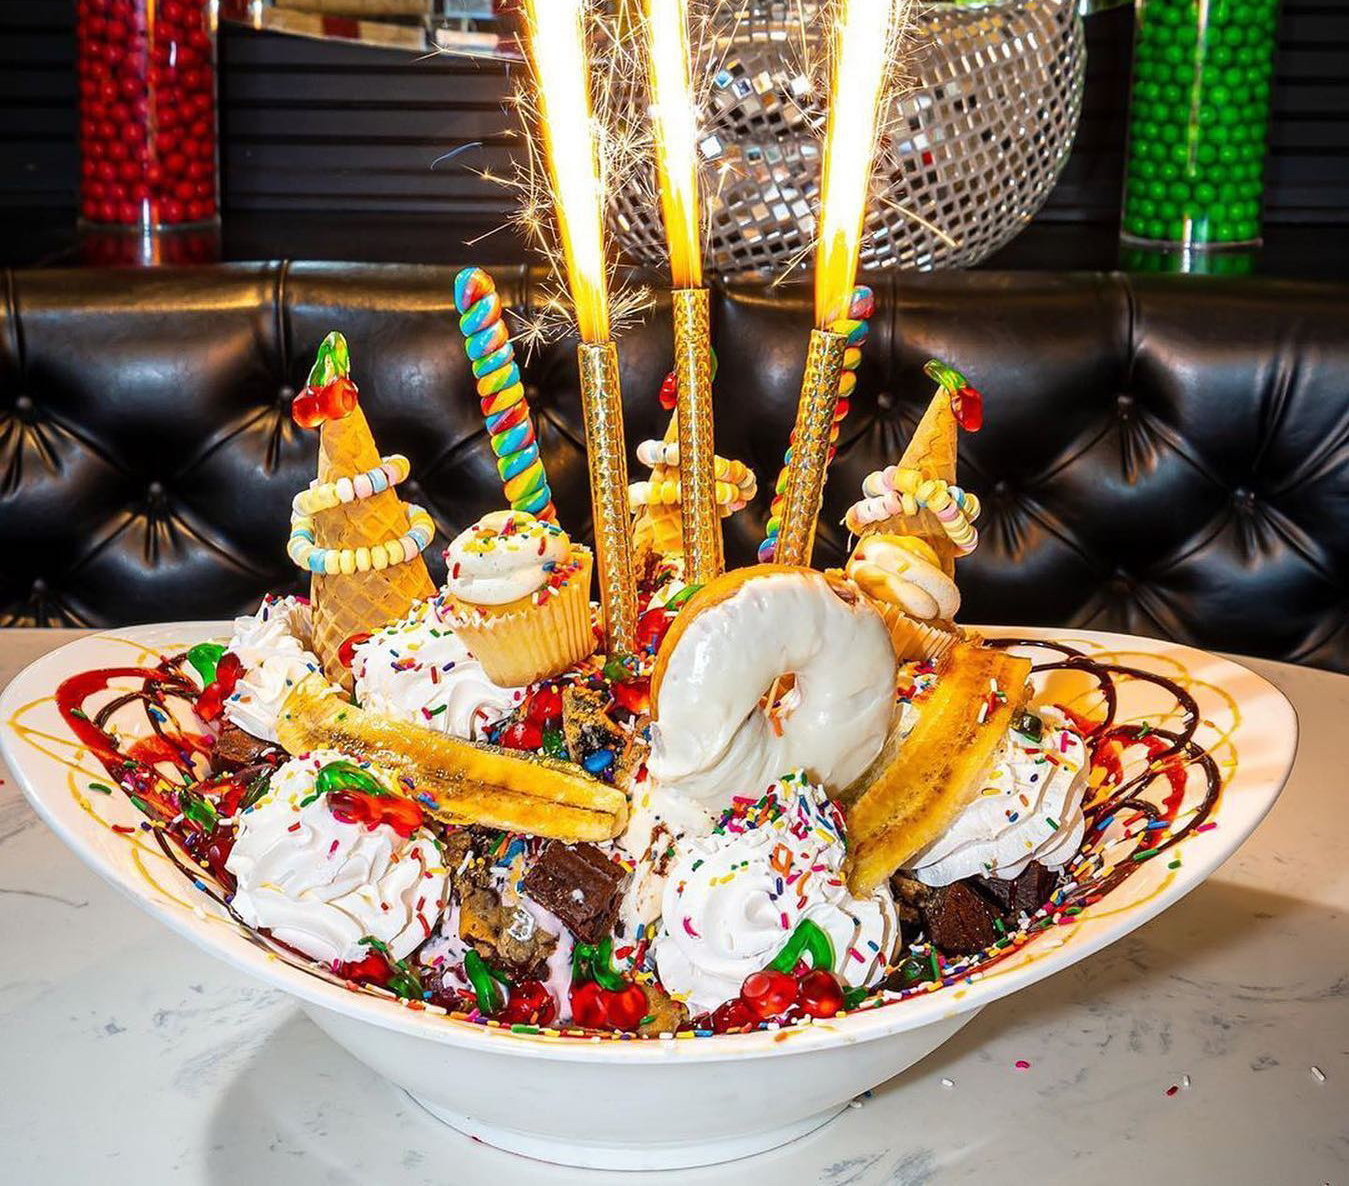 The “World Famous Sugar Factory King Kong Sundae” is $99 and serves 12.